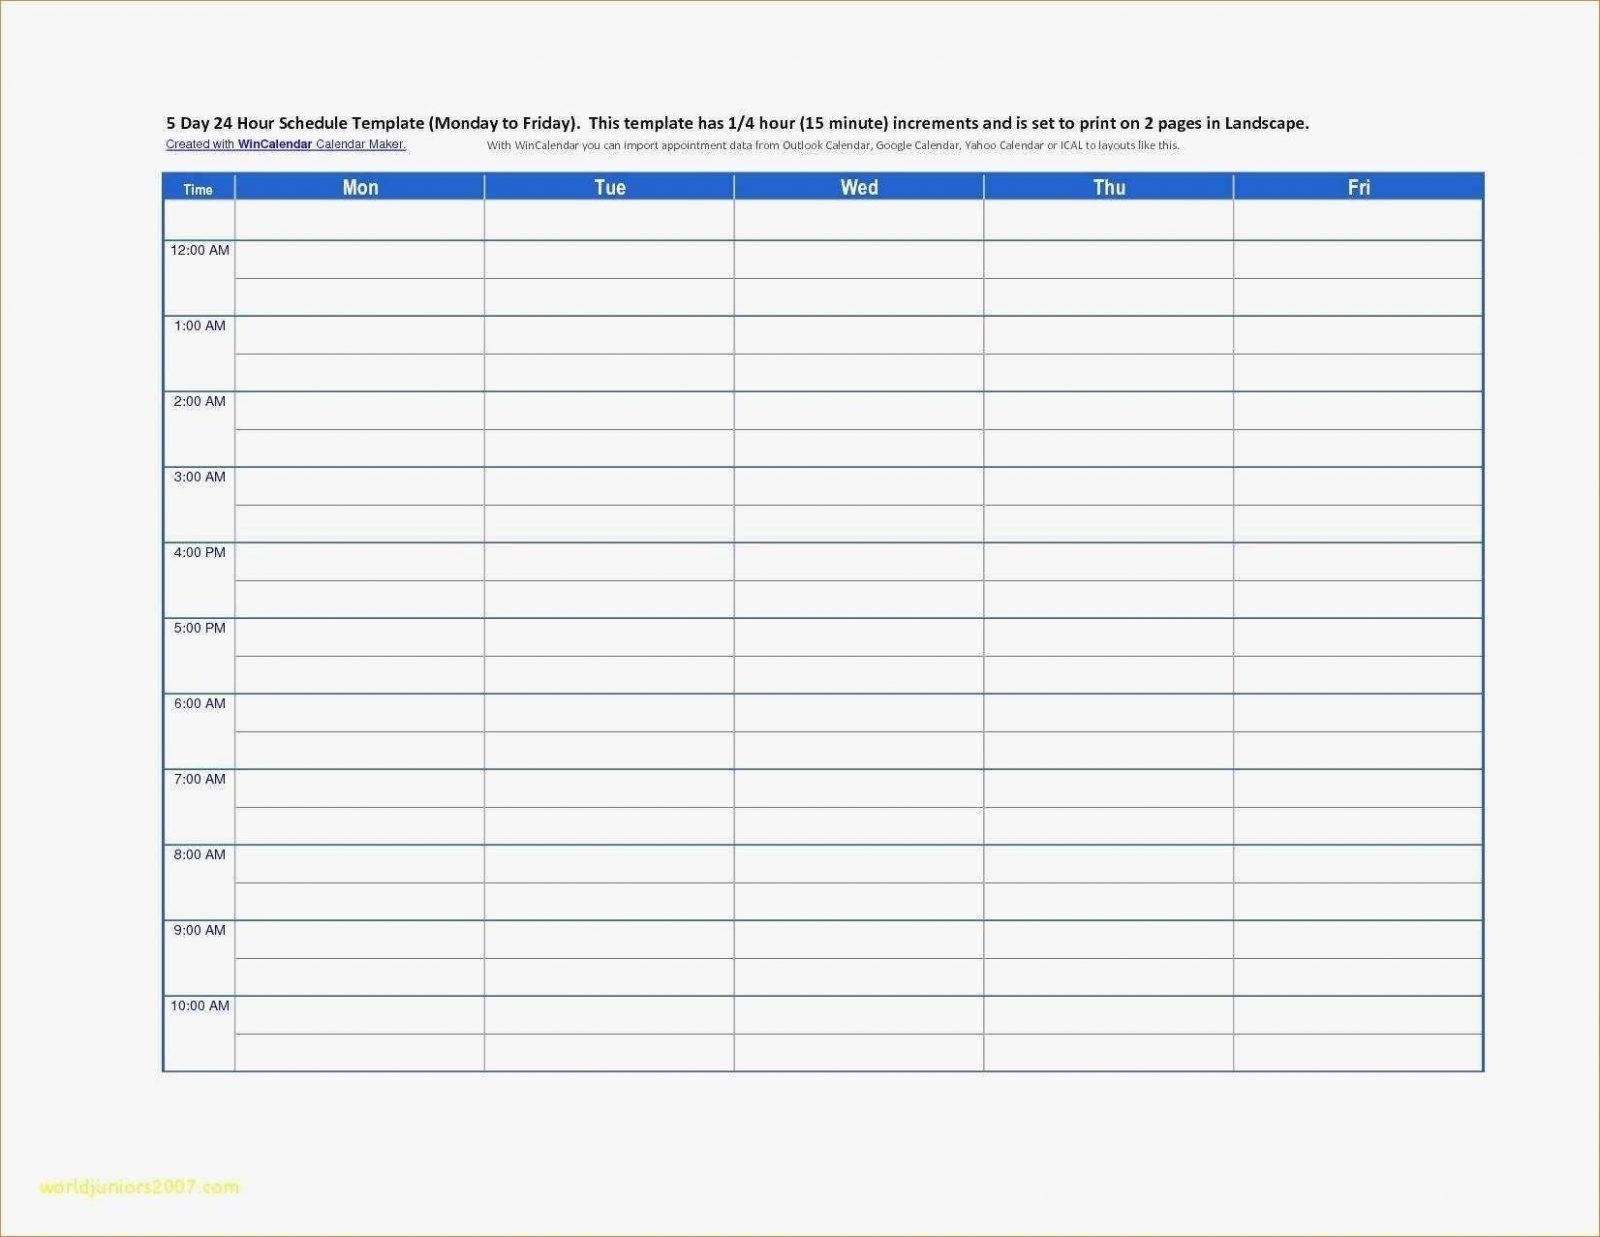 New Excel Gantt Chart Template Free (With Images) | Schedule